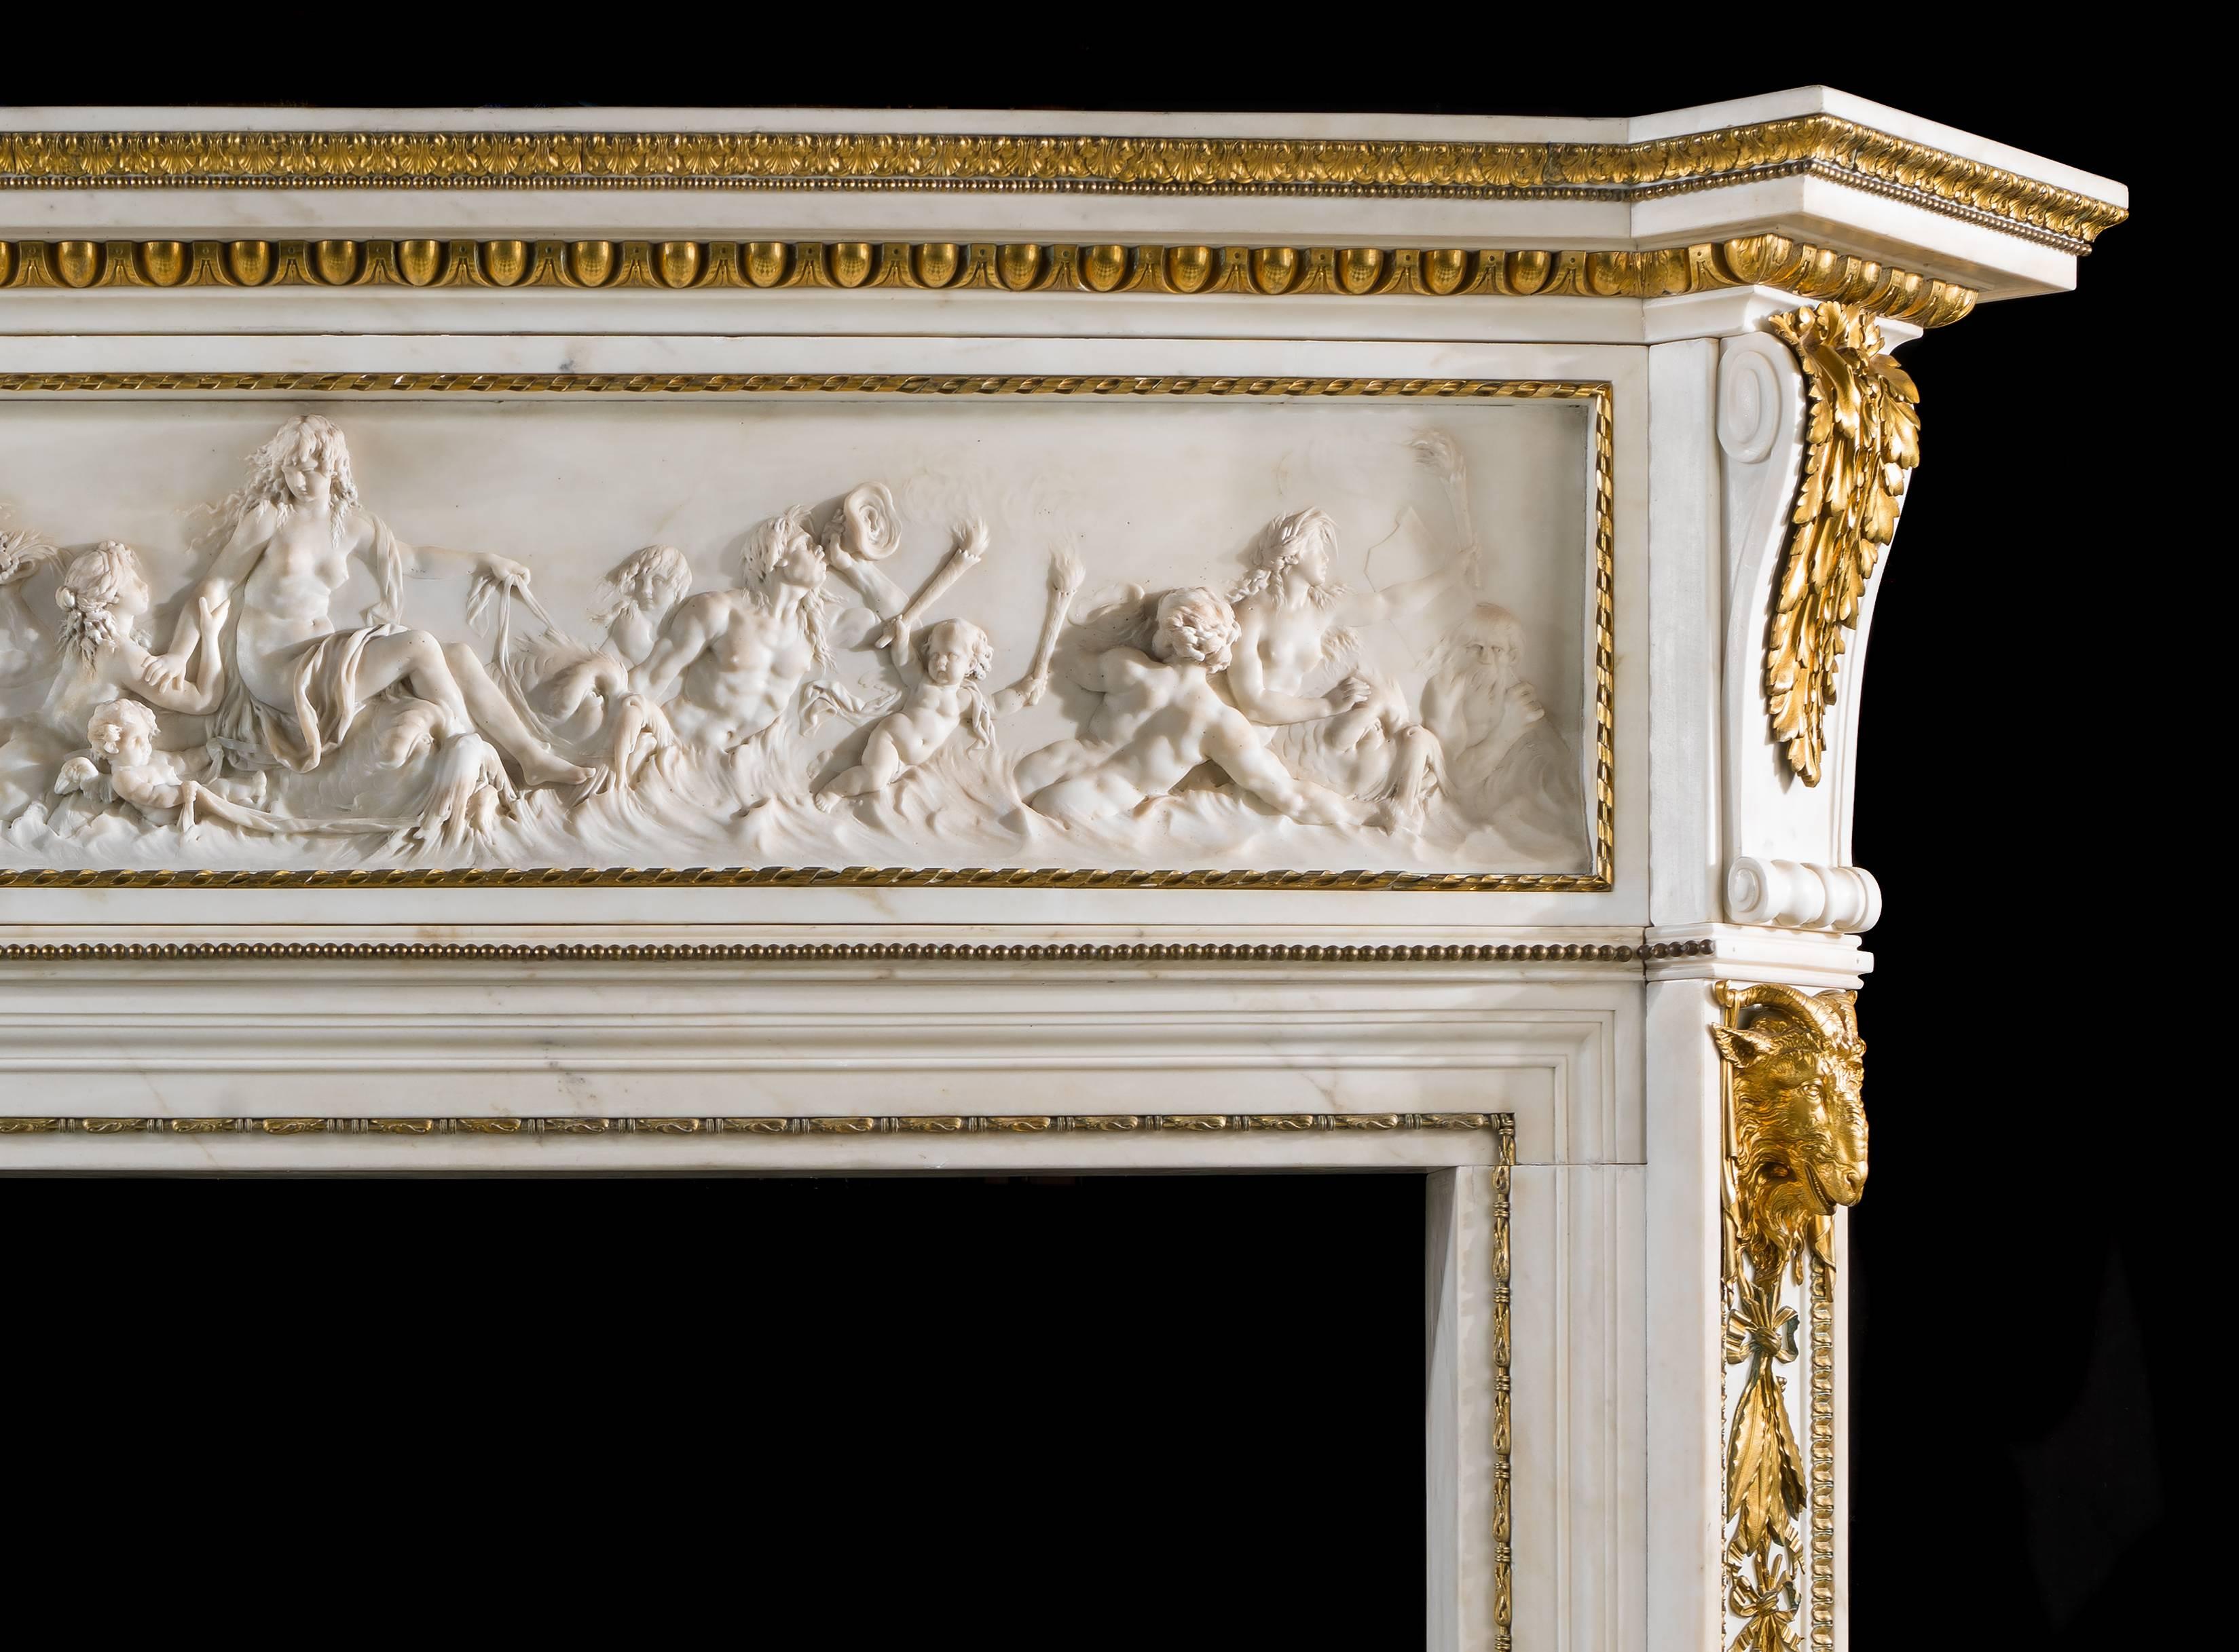 A rare 19th century statuary marble and gilded ormolu chimneypiece in
the French Regency style with a large, exquisitely carved 18th century
panel after Clodion (1738–1814).

The fireplace, originally in the drawing room of Brook House located at